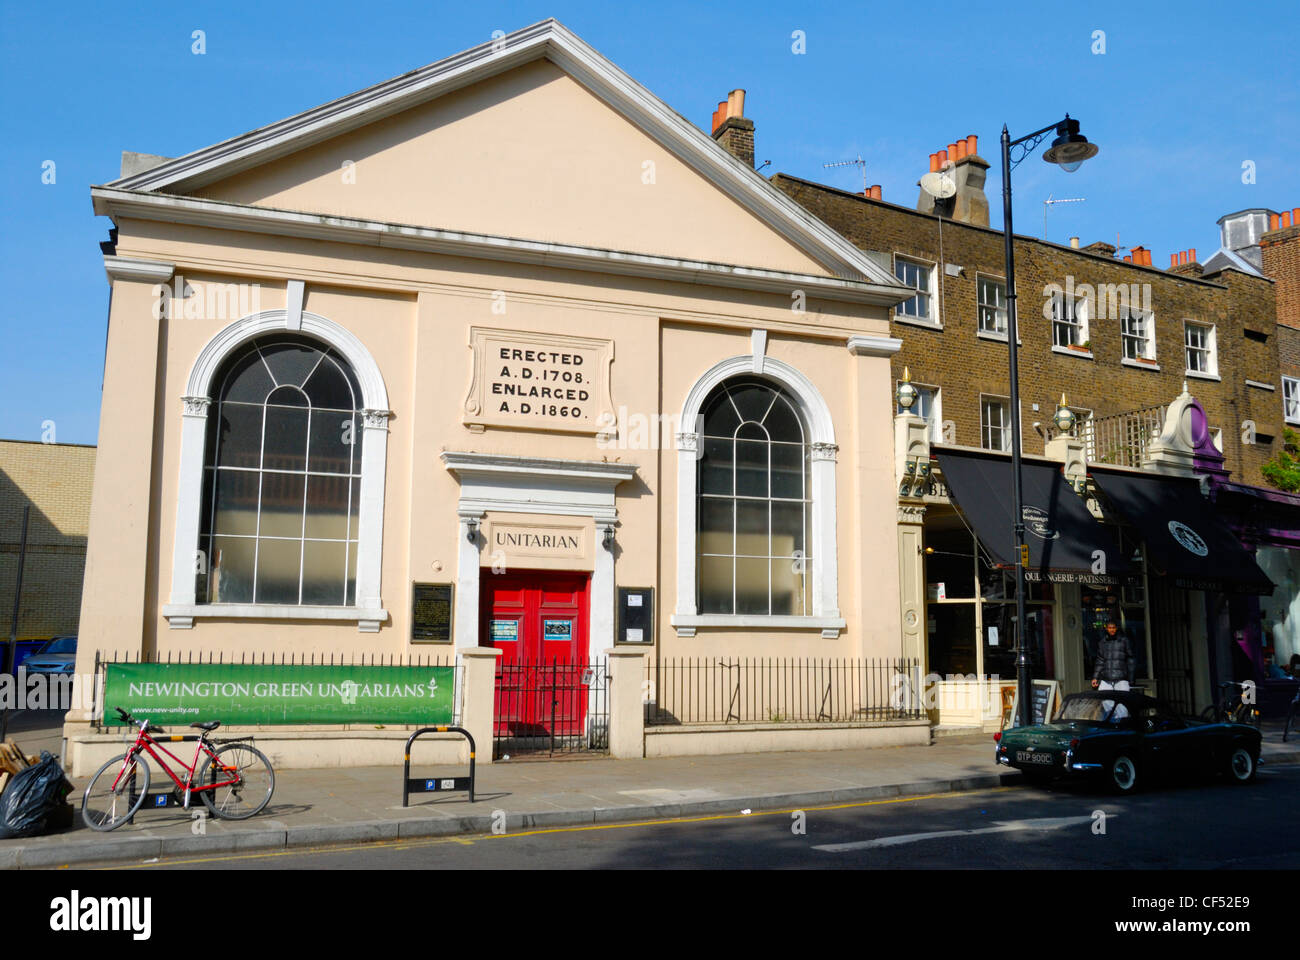 Newington Green Unitarian Church (NGUC), London's oldest Nonconformist place of worship still in use. Stock Photo